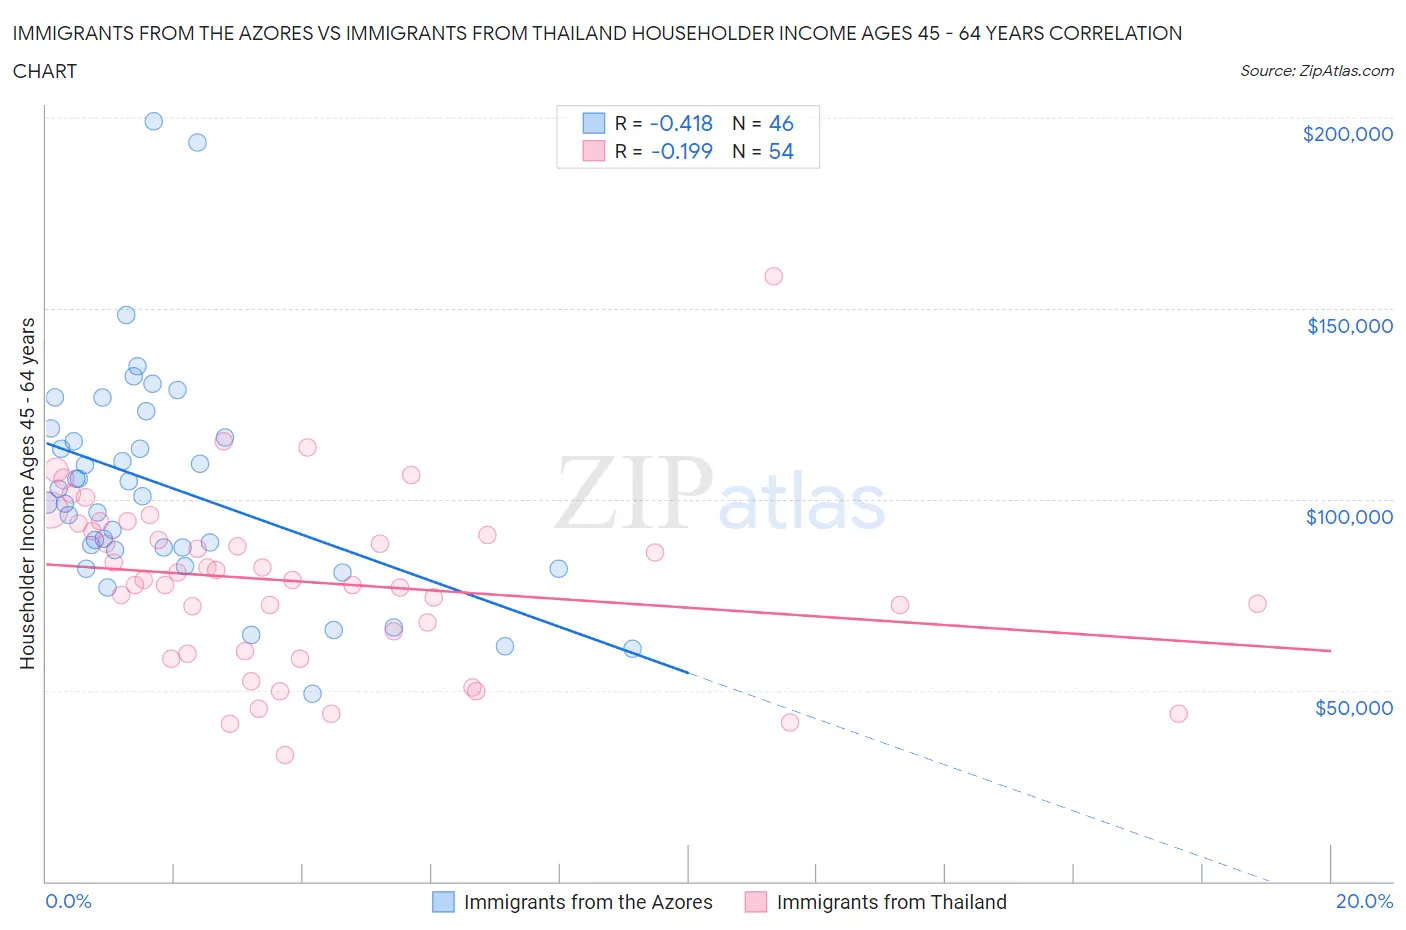 Immigrants from the Azores vs Immigrants from Thailand Householder Income Ages 45 - 64 years